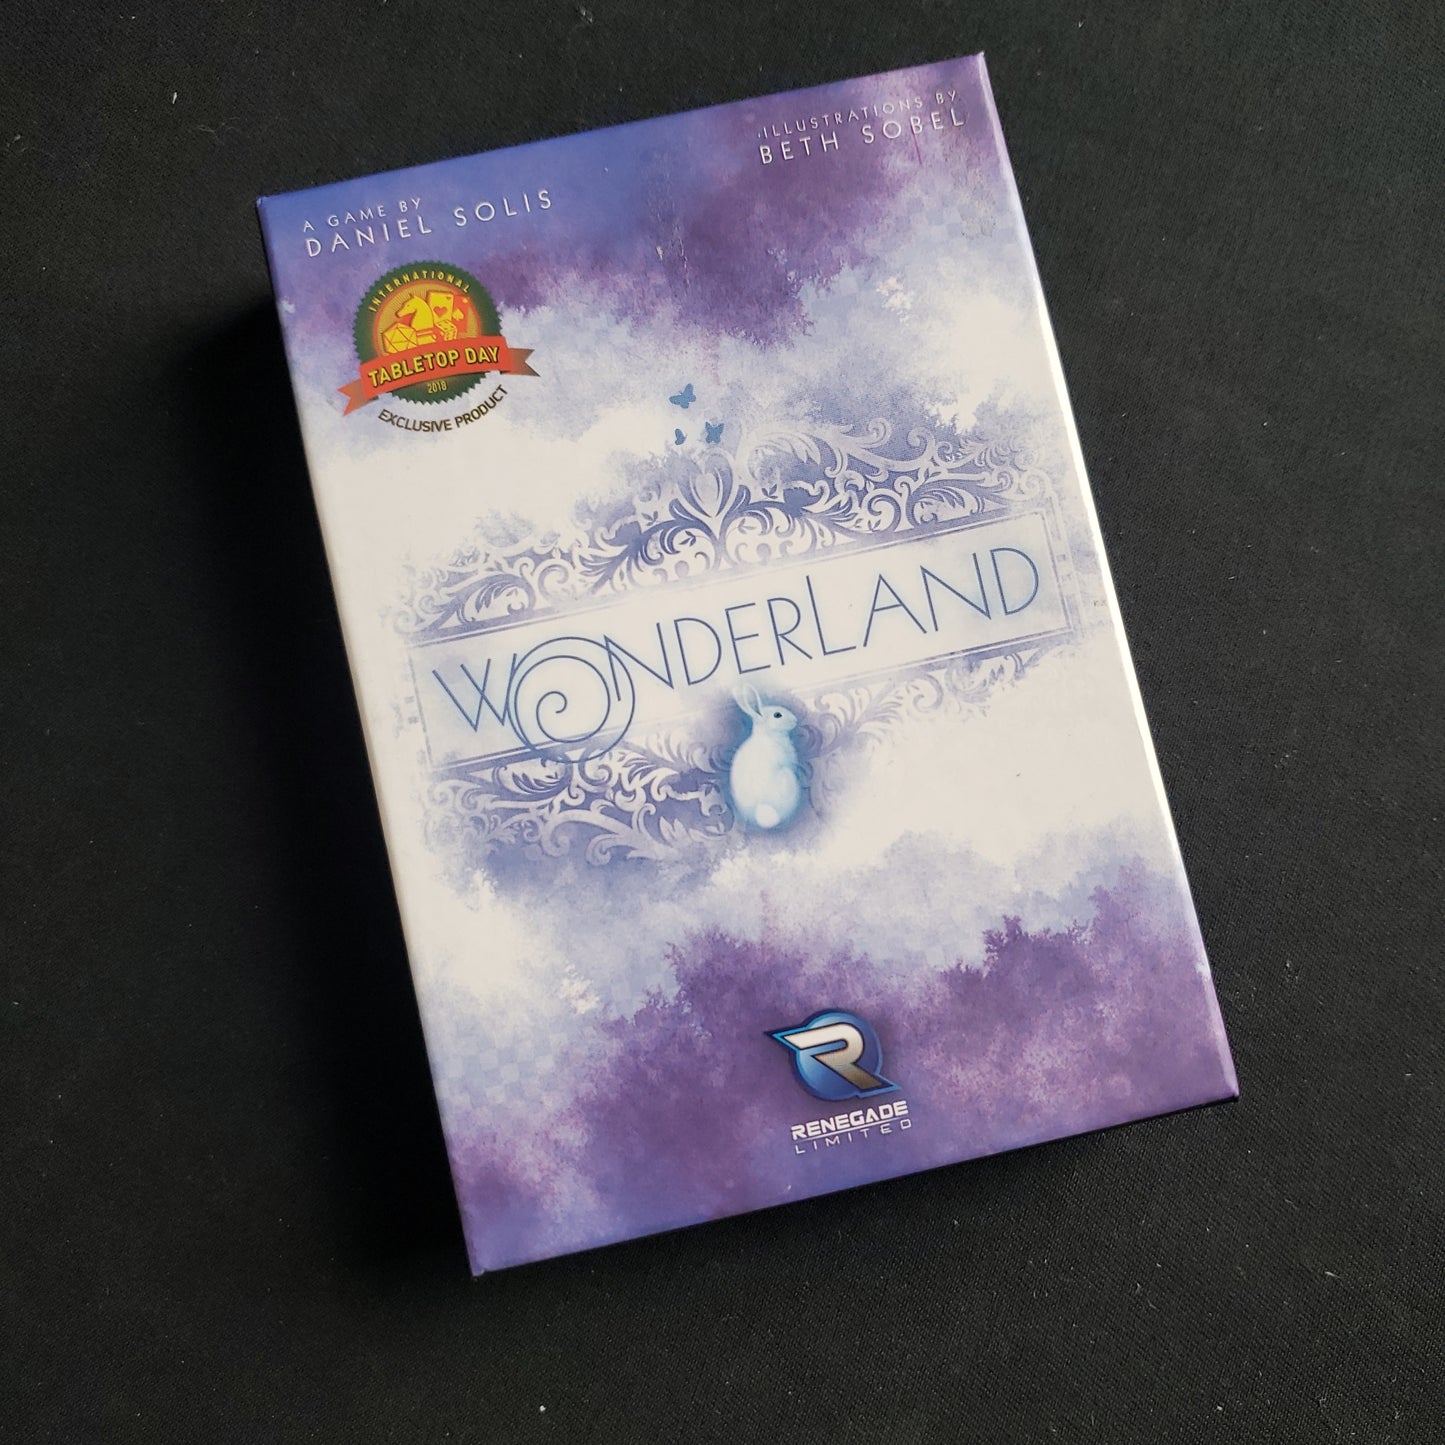 Image shows the front cover of the box of the Wonderland card game